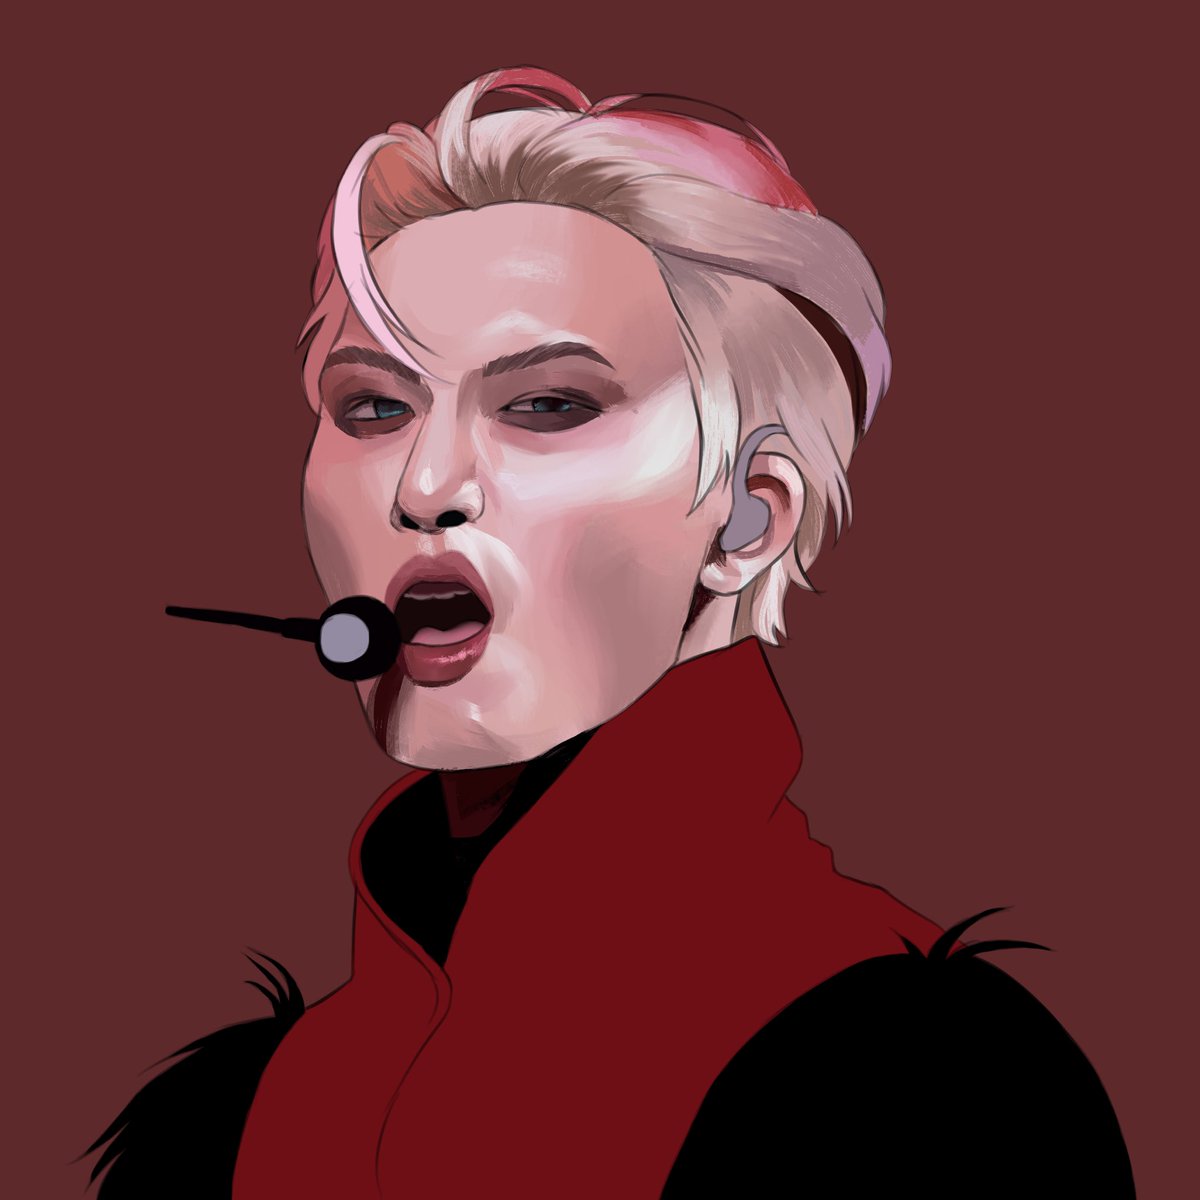 「wip i'm trying a messier painting style 」|Chlo 💫 SAW SKZ!!!のイラスト